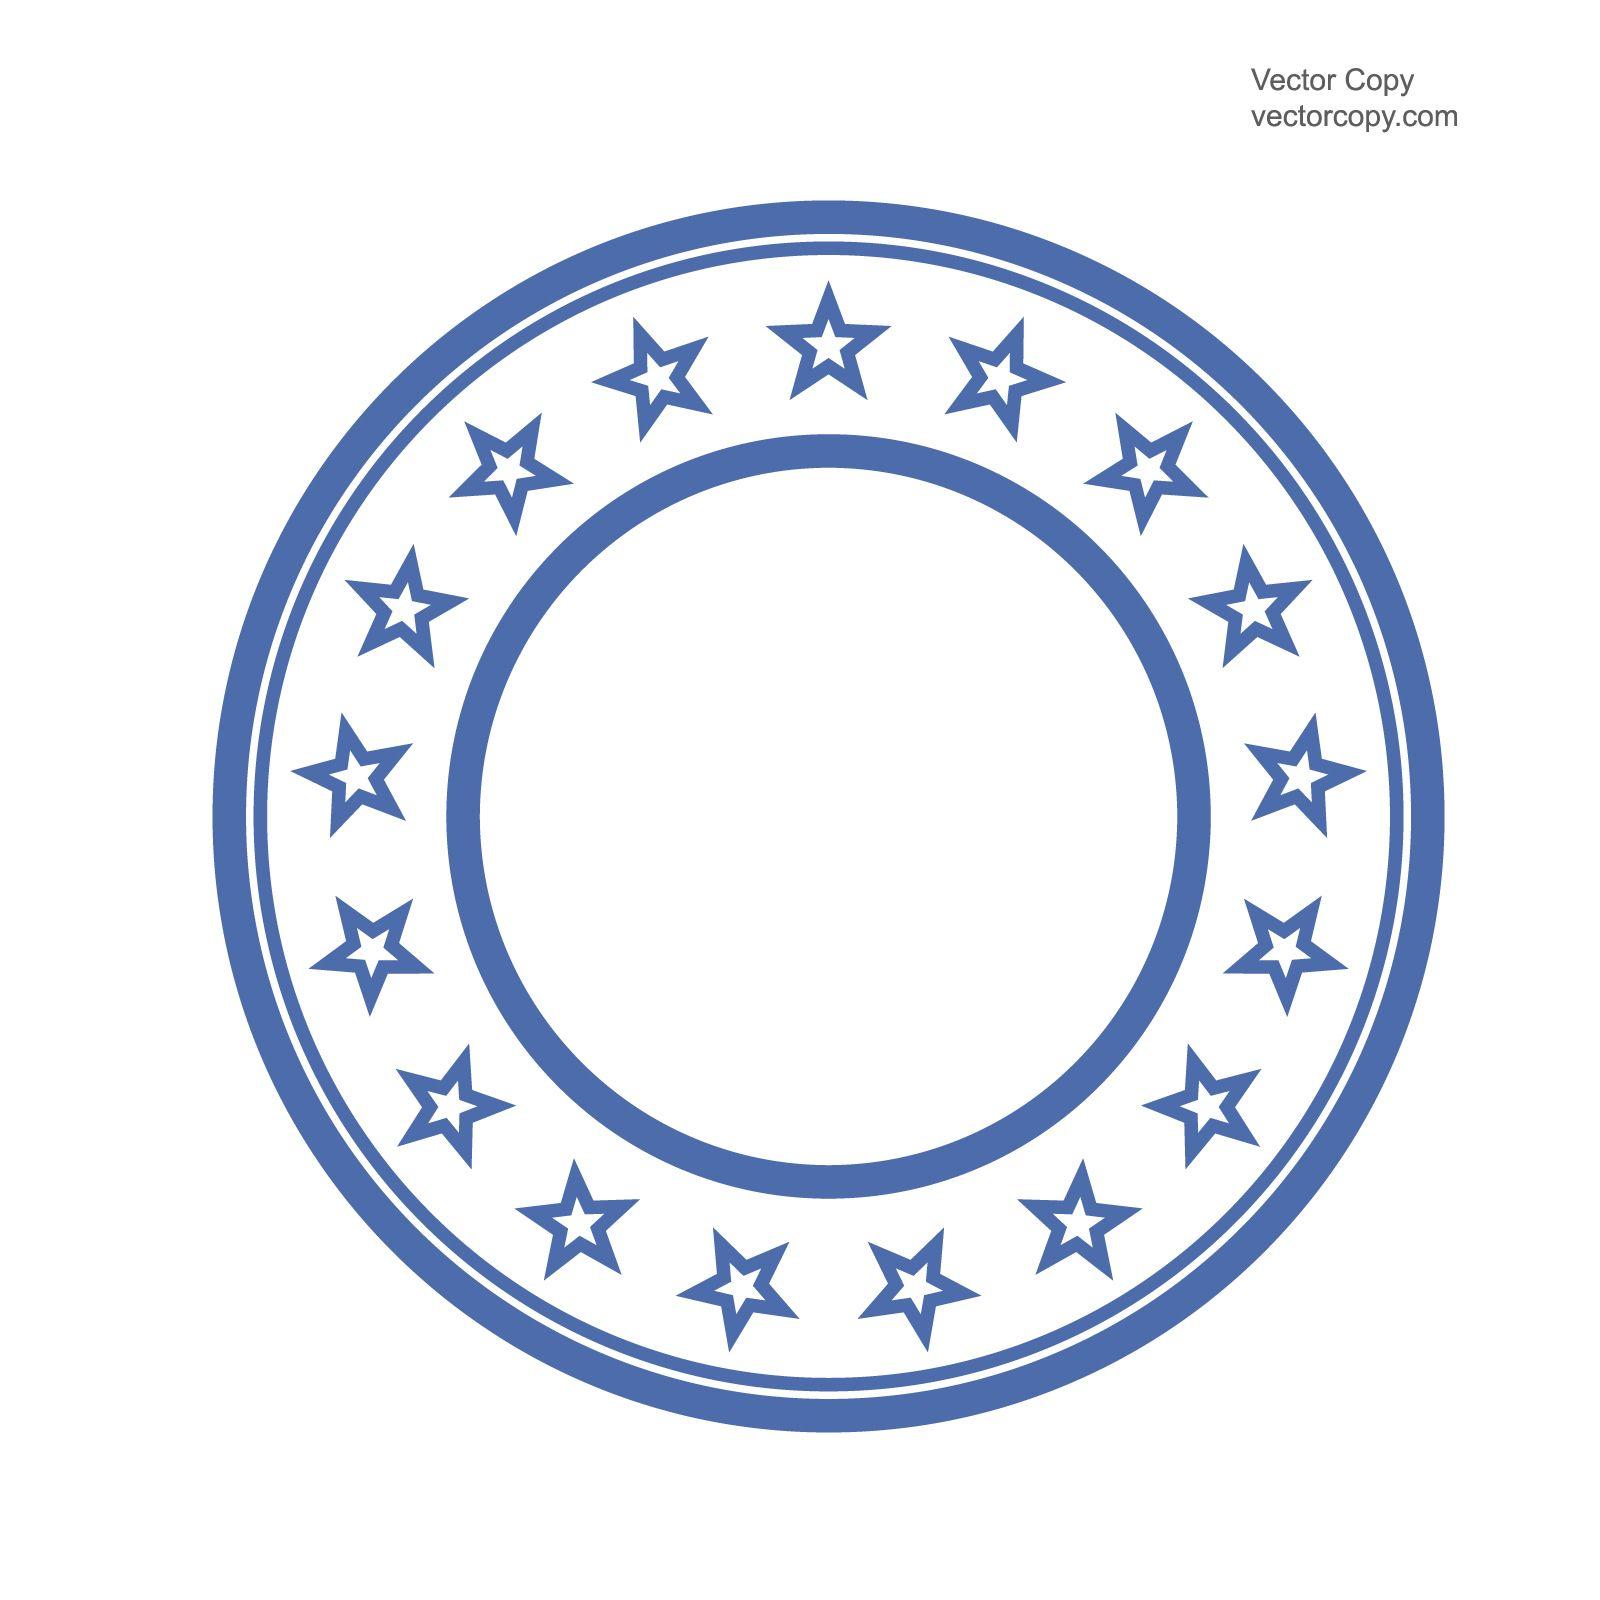 Blank Round Stamp Logo - Blank template of round stamp, free vector #vectorart #vectorclipart ...